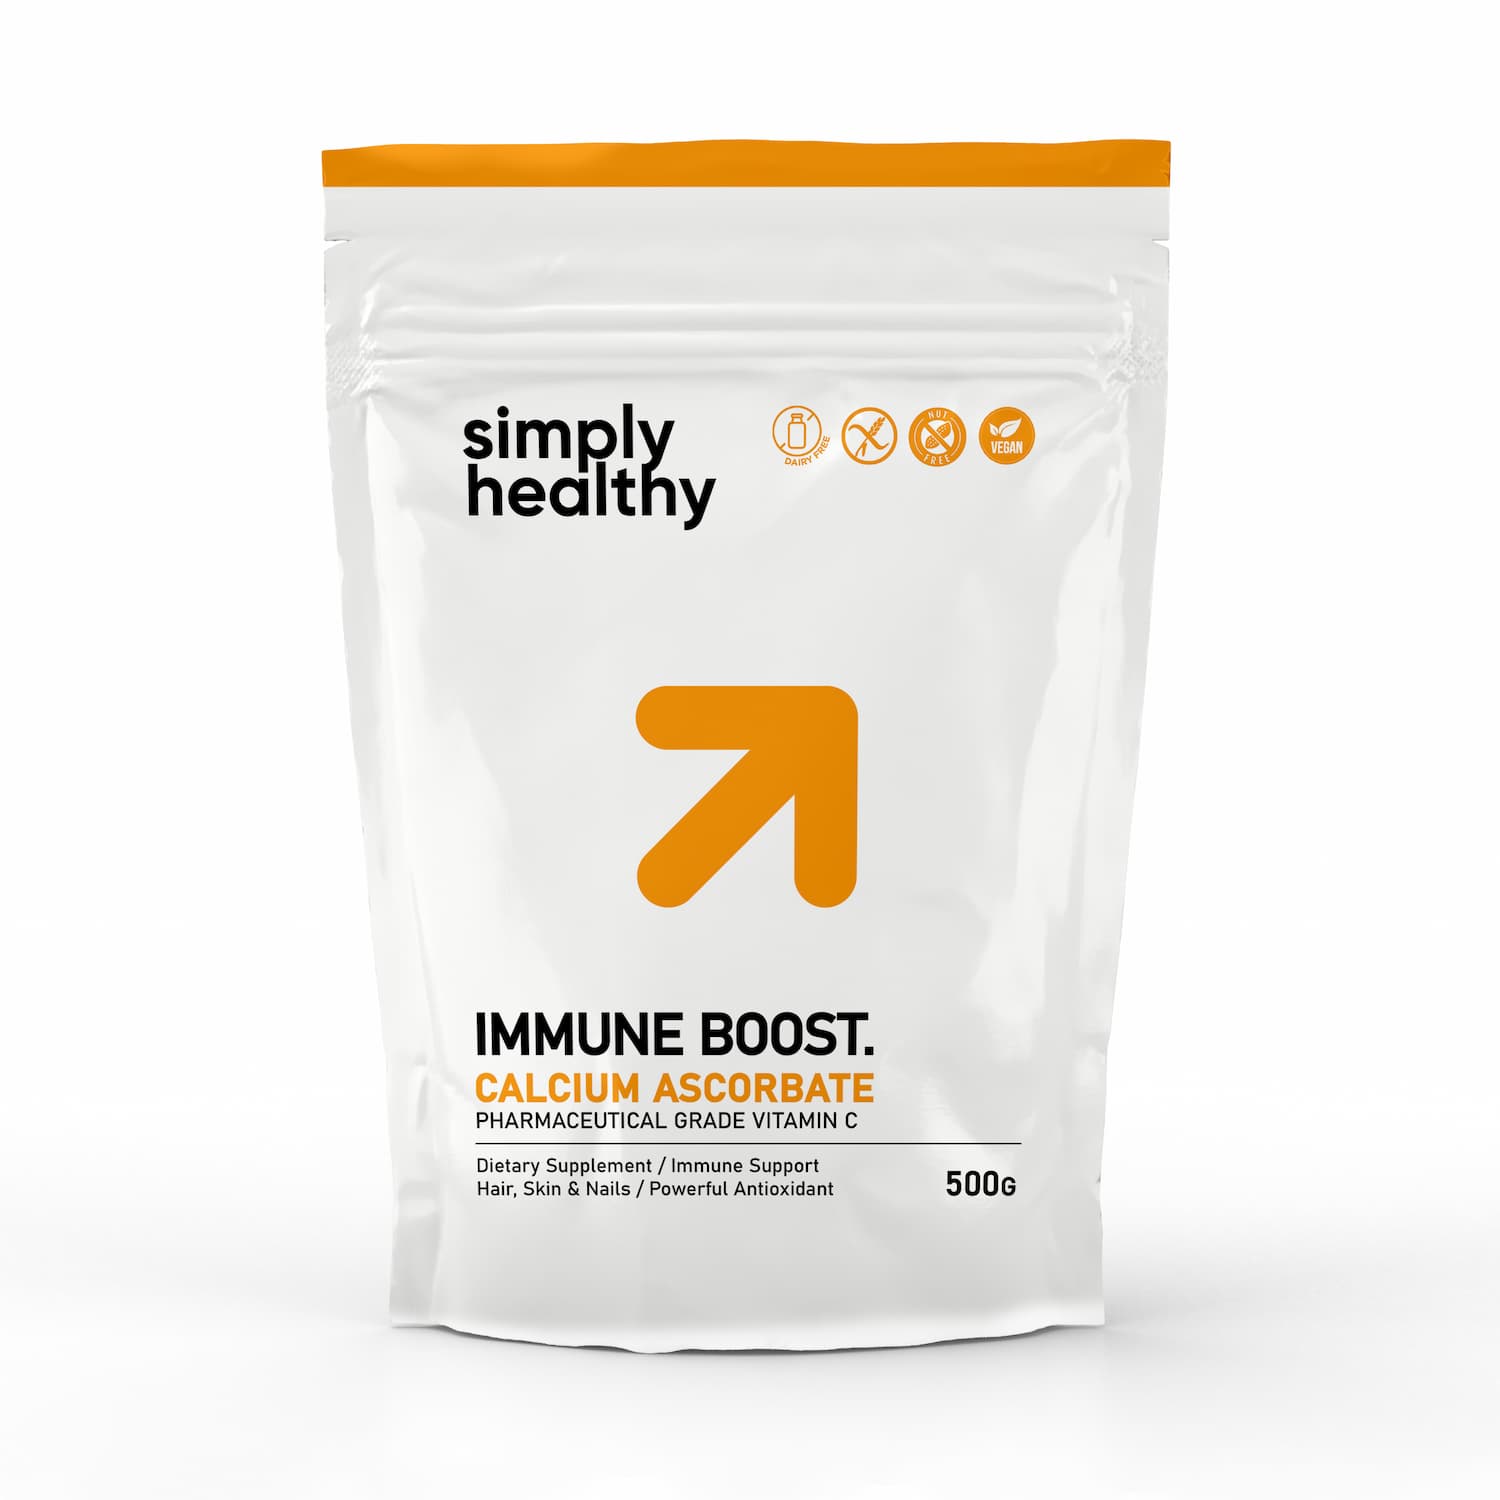 Calcium Ascorbate - 500g by Simply Healthy